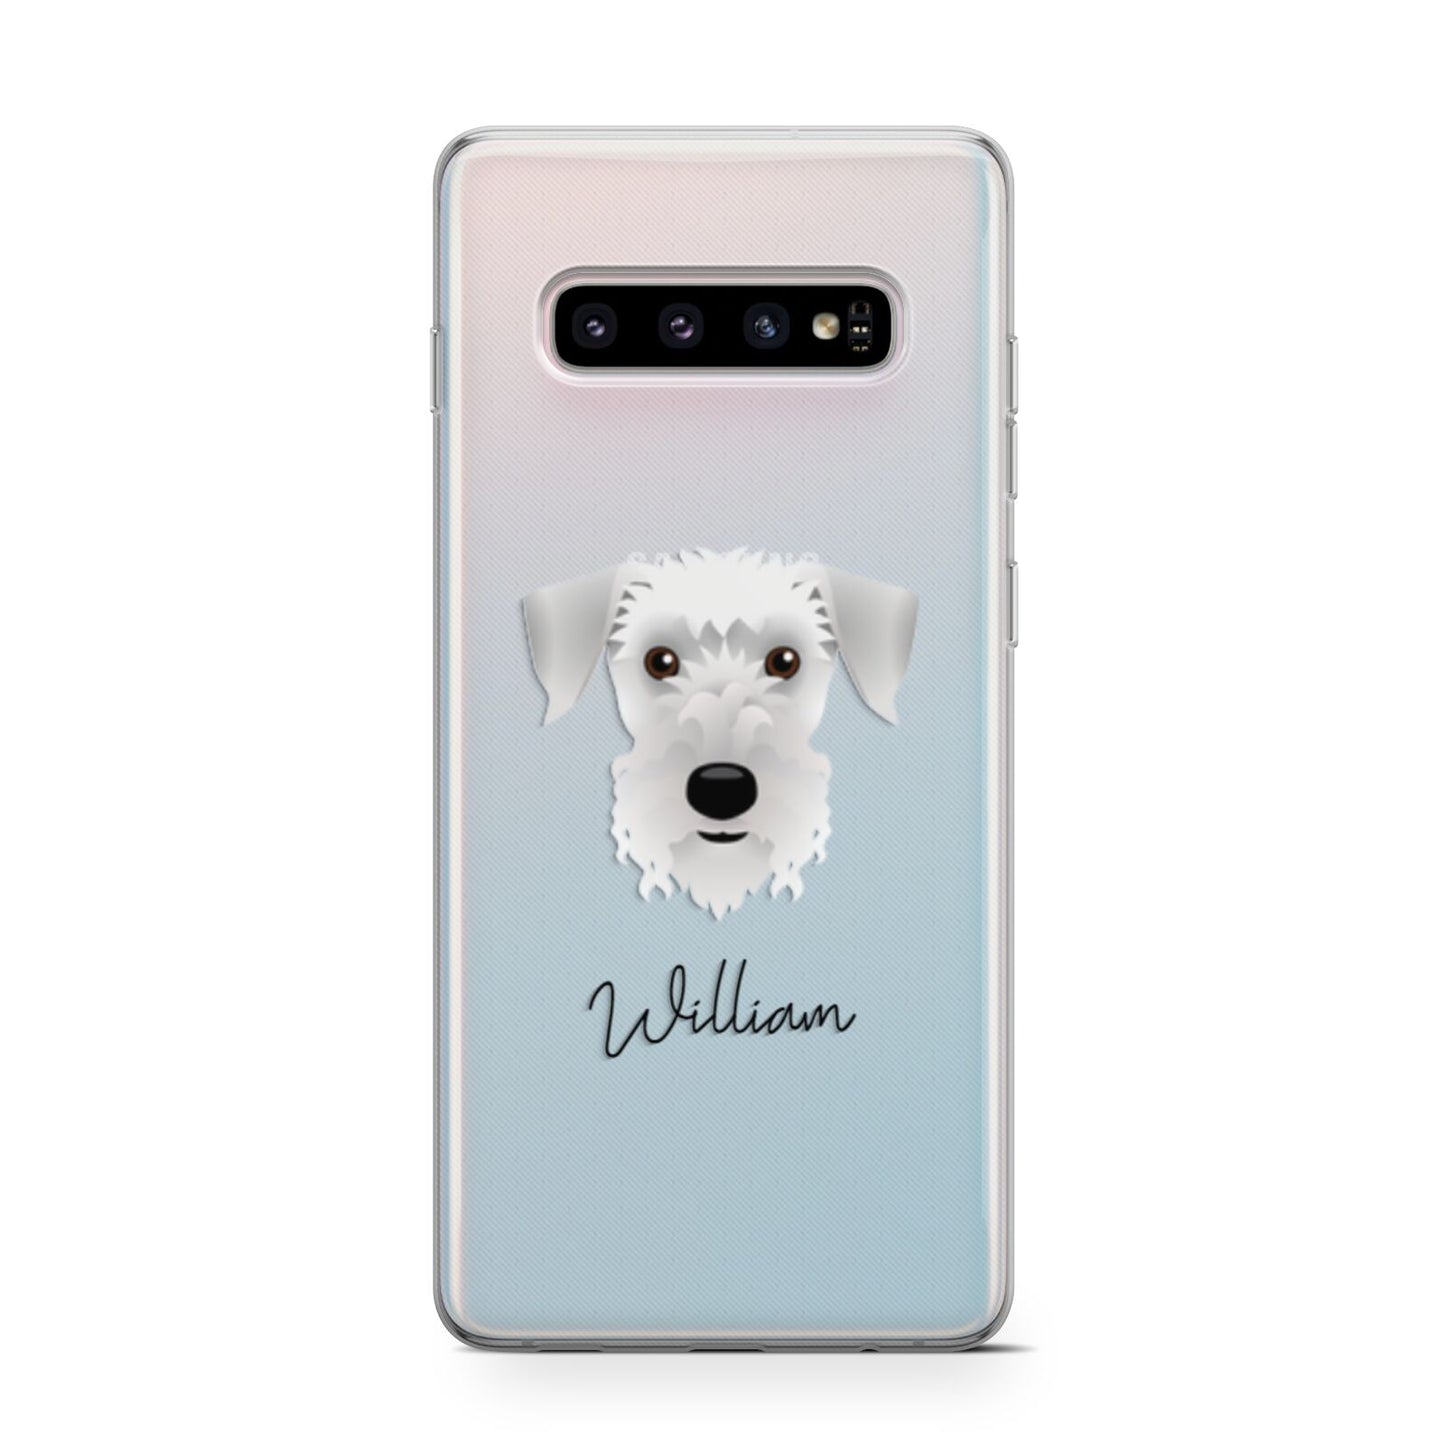 Cesky Terrier Personalised Samsung Galaxy S10 Case